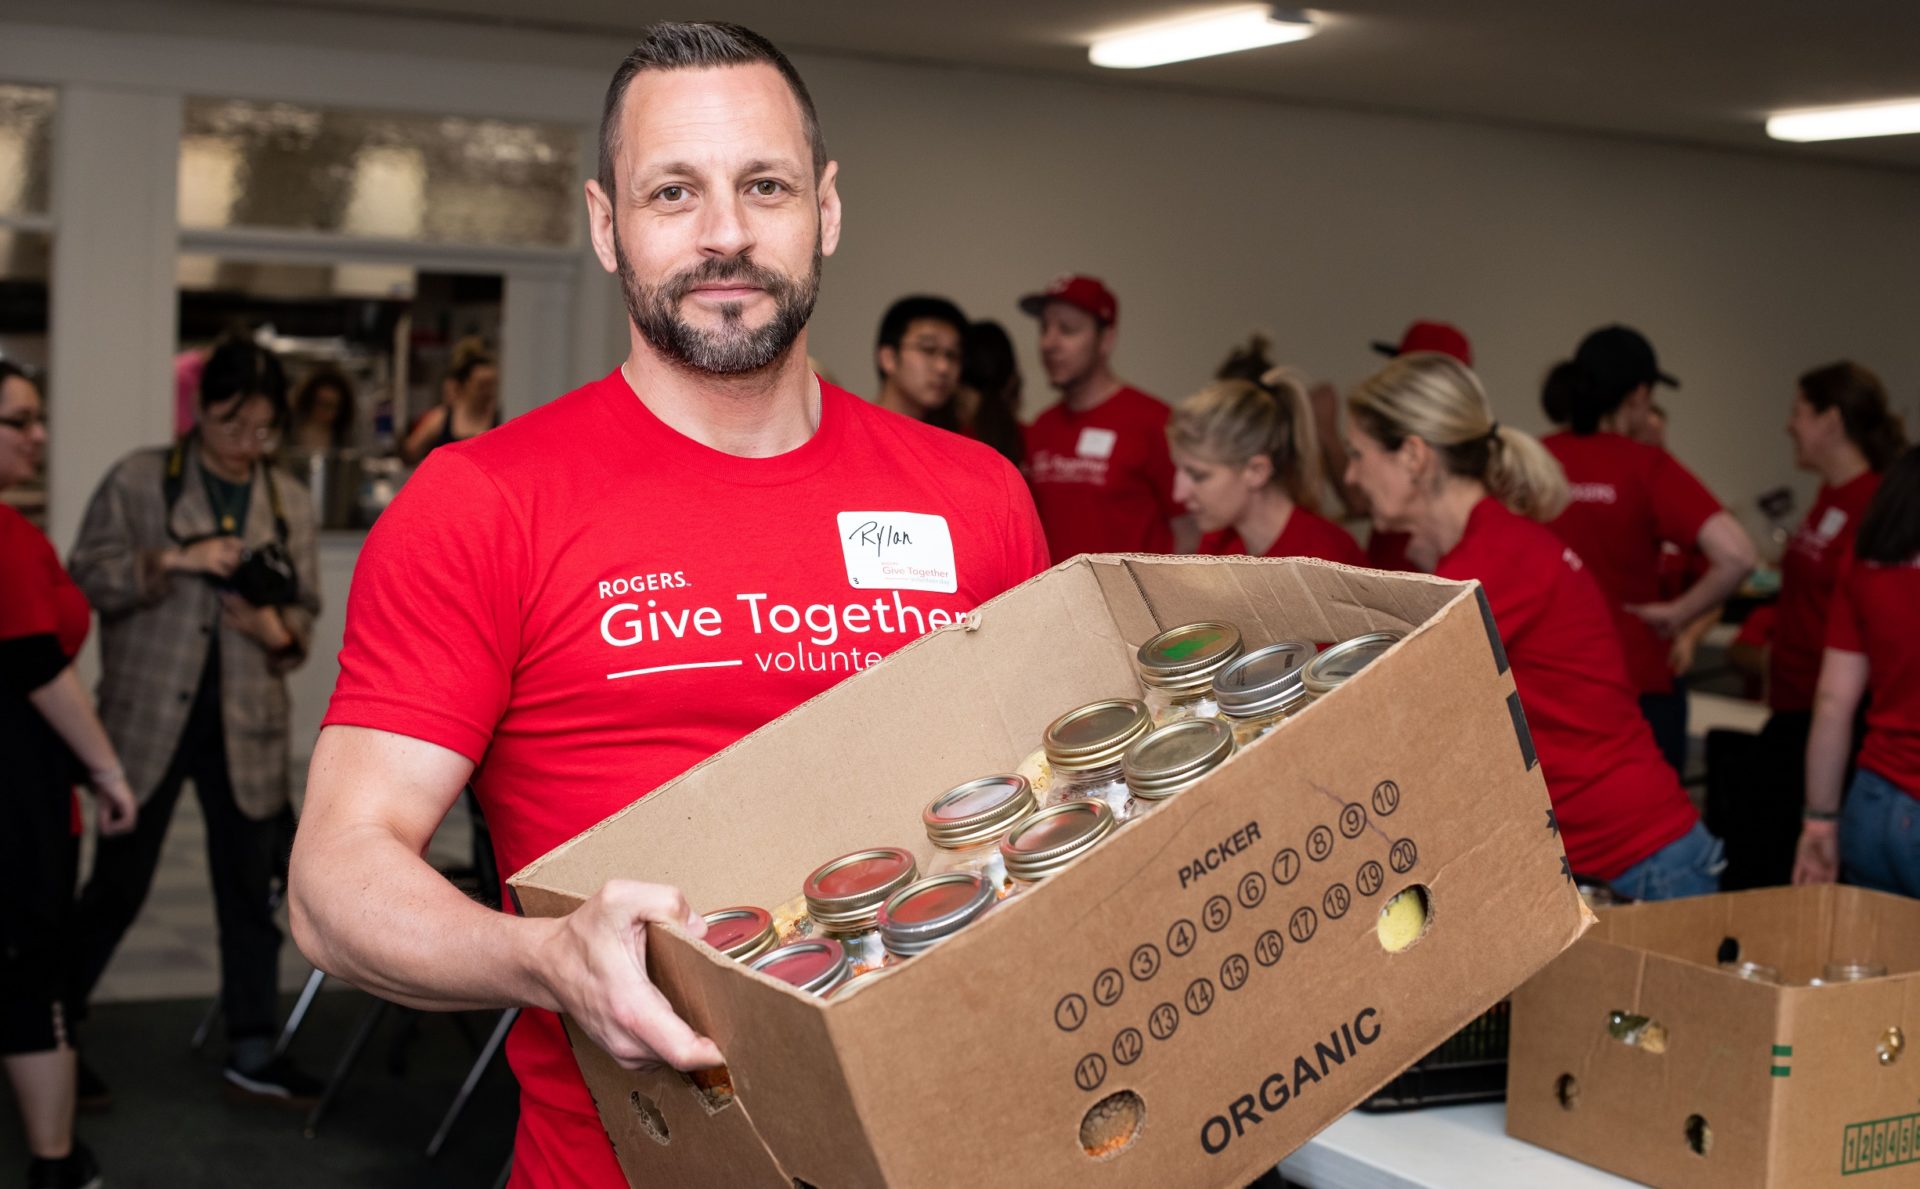 Rogers volunteer holding a box of canned foods inside office